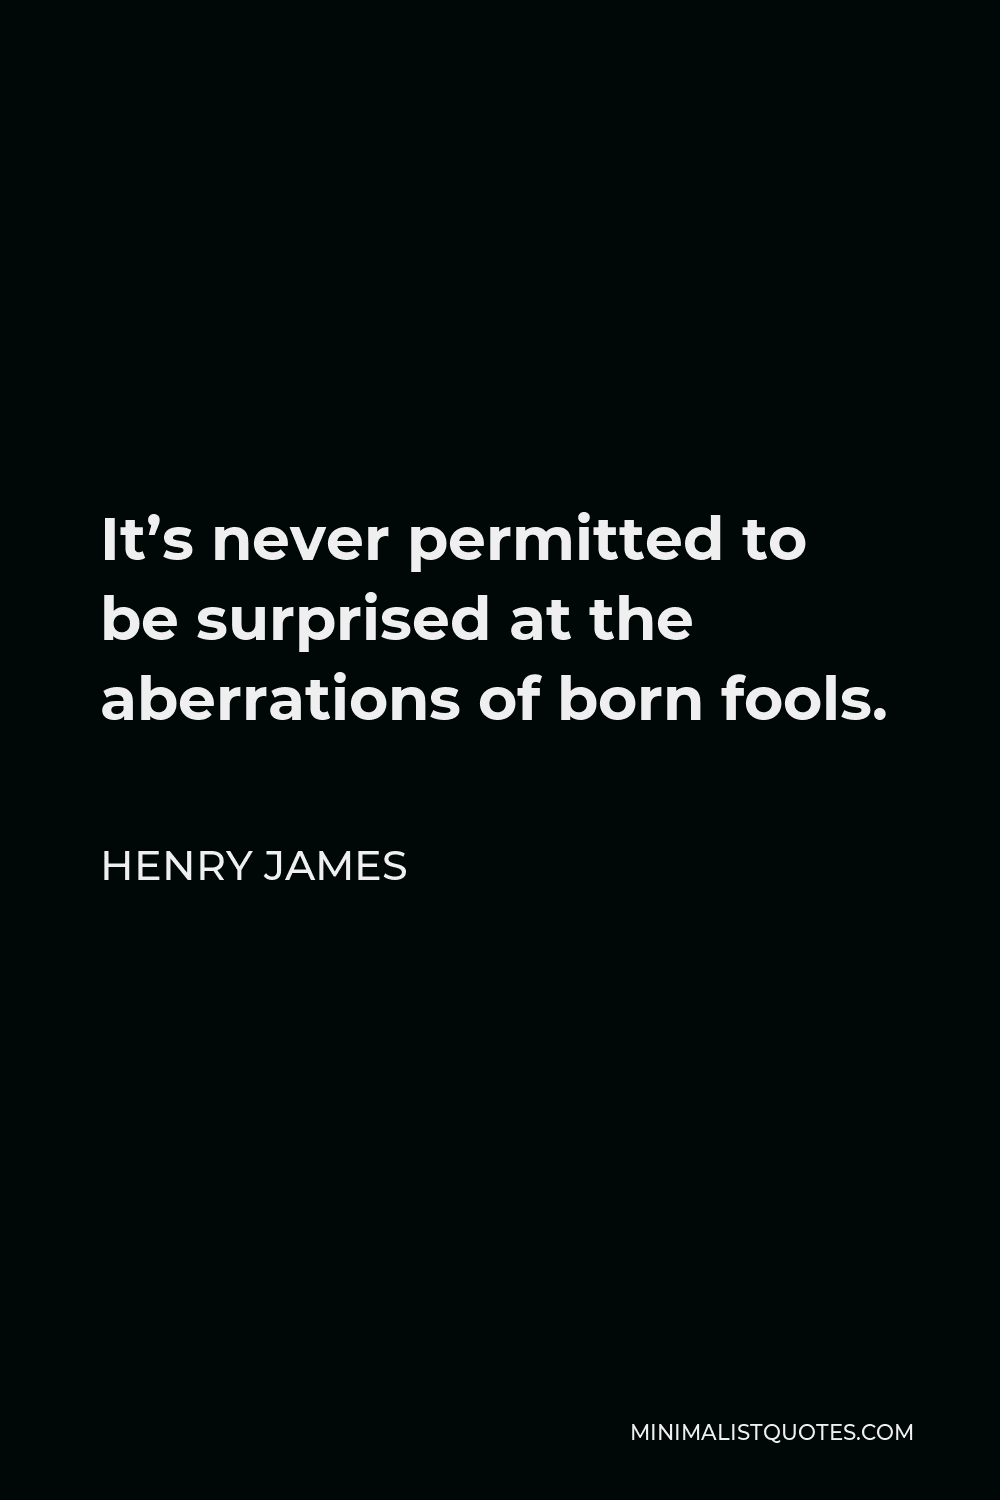 Henry James Quote - It’s never permitted to be surprised at the aberrations of born fools.